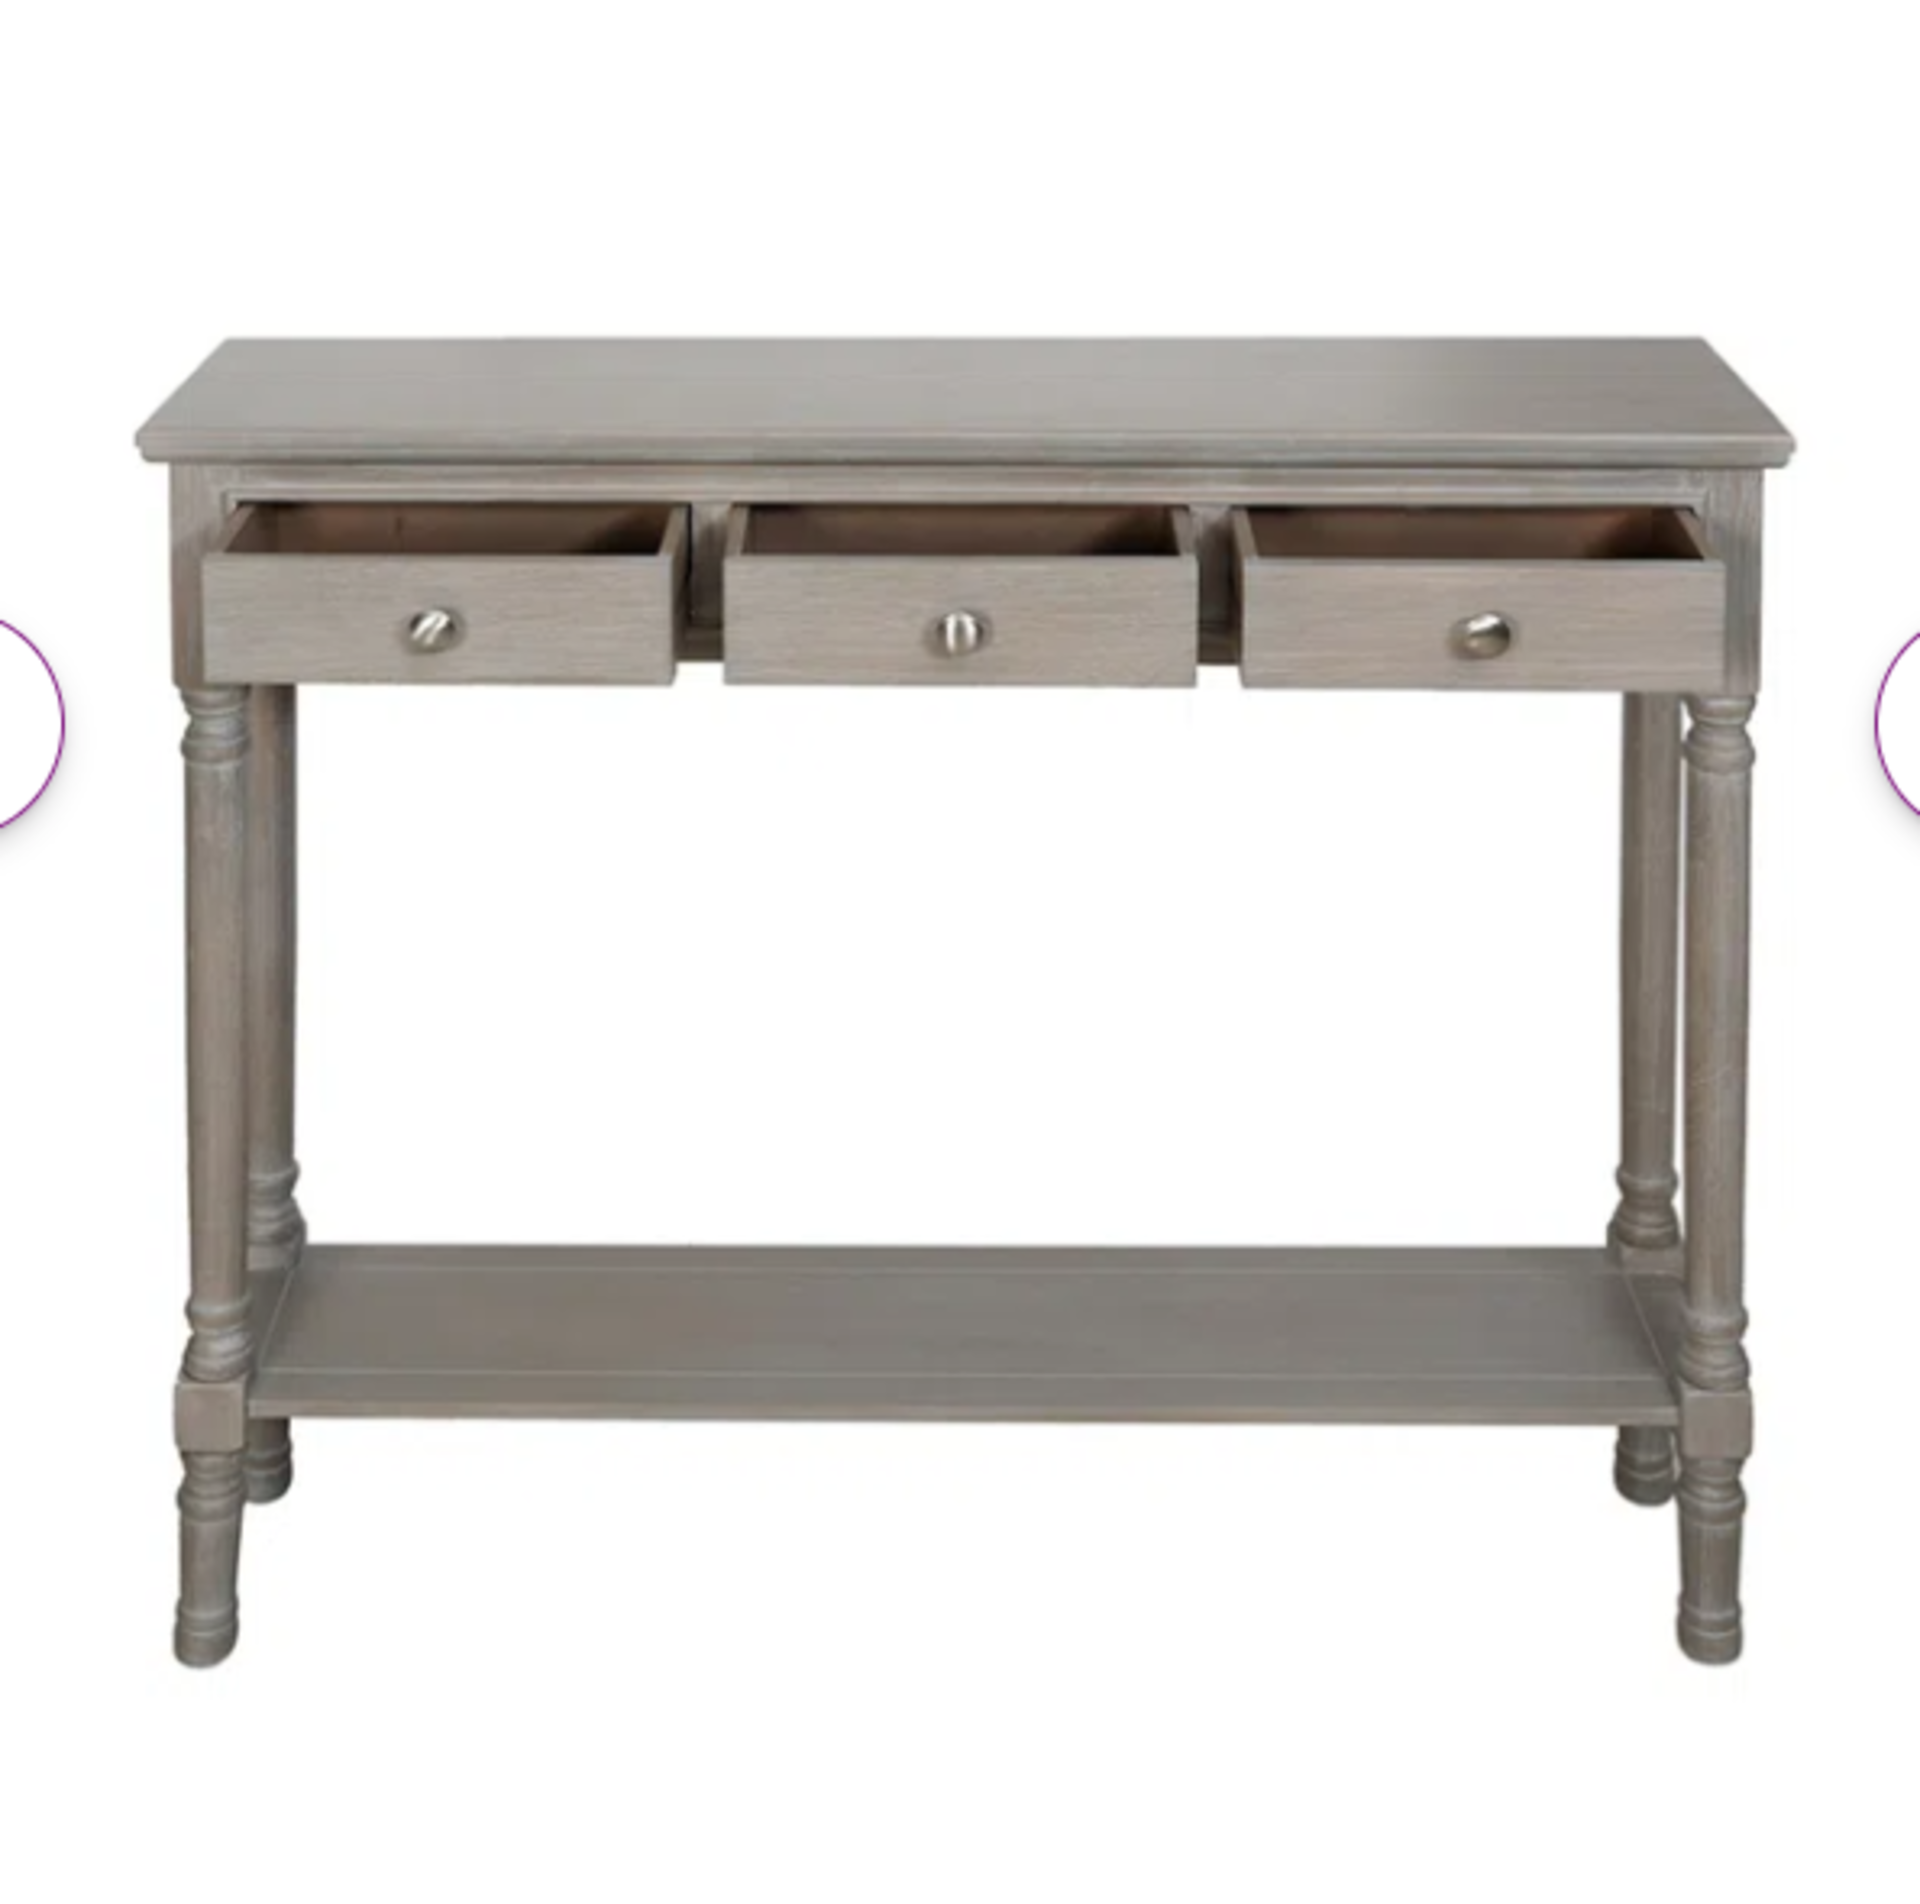 3 Drawer Console Table for Hallway & Living Room Furniture, Slim Entry Hall Table Cabinet. -U2 - Image 2 of 2